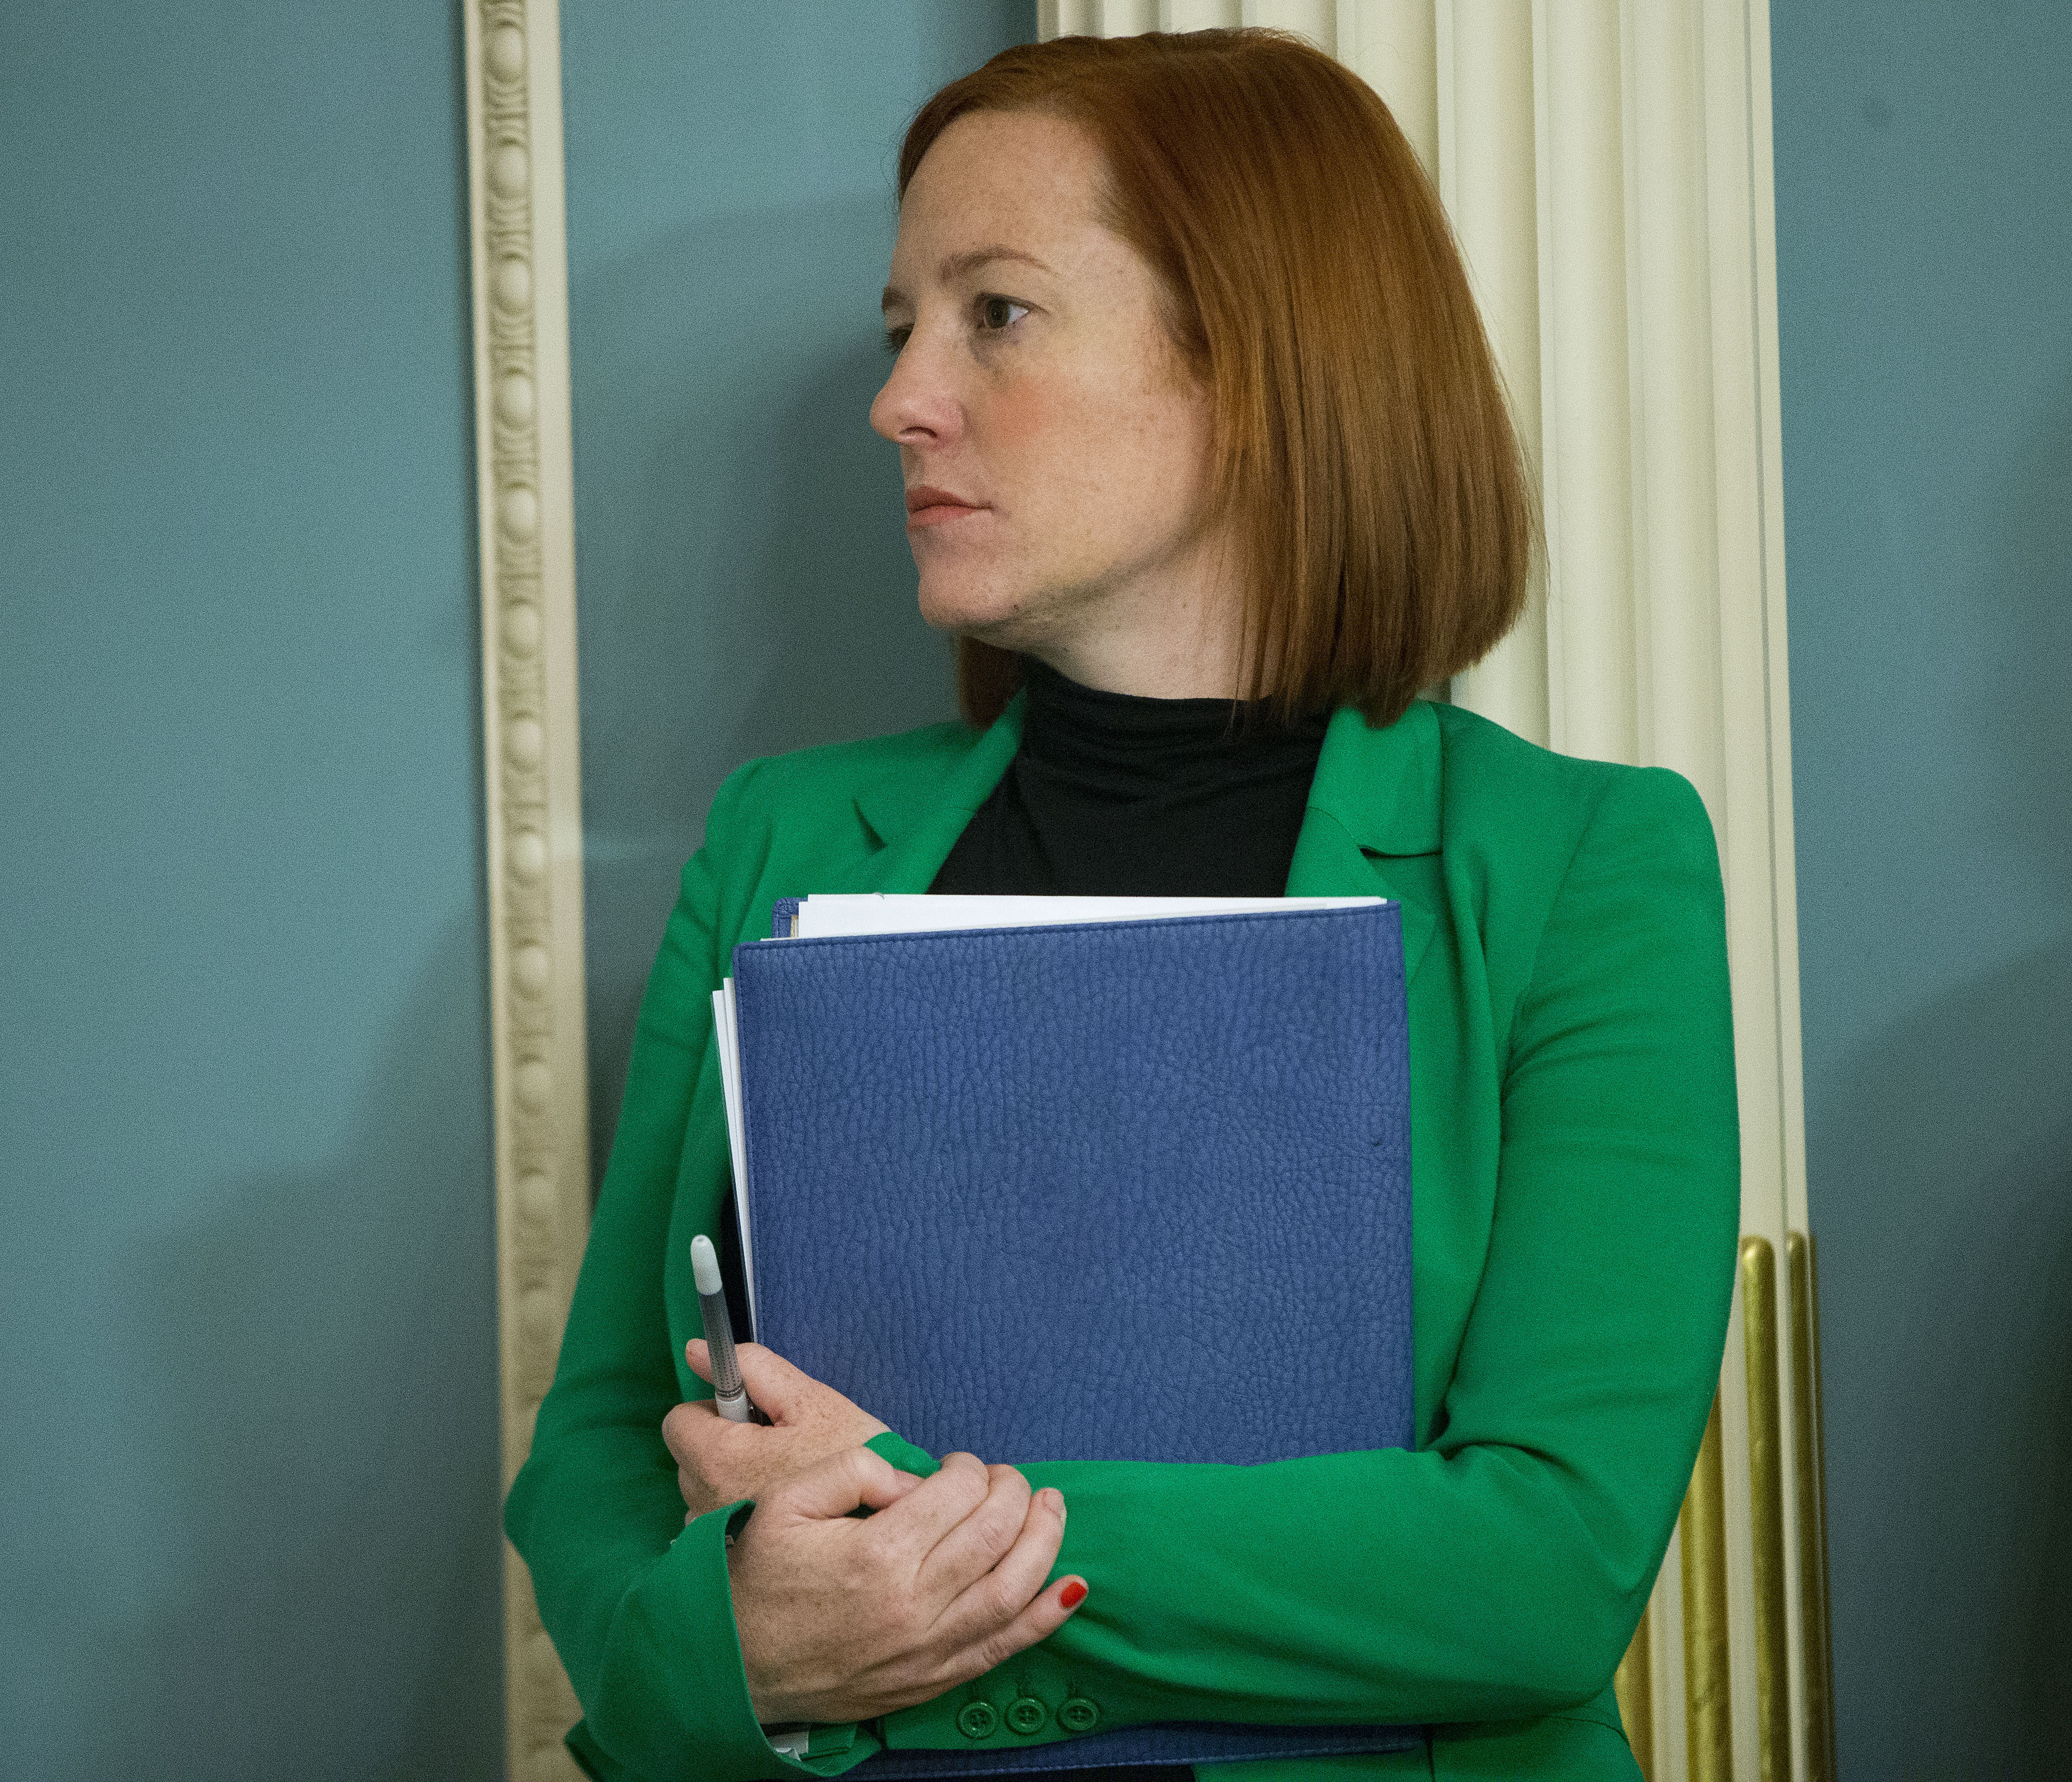 State Department spokeswoman Jen Psaki stands in on a meeting in Washington, Friday, Feb. 27, 2015. President-elect Joe Biden will have an all-female communications team at his White House, led by campaign communications director Kate Bedingfield. Jen Psaki will be his press secretary. Photo: AP